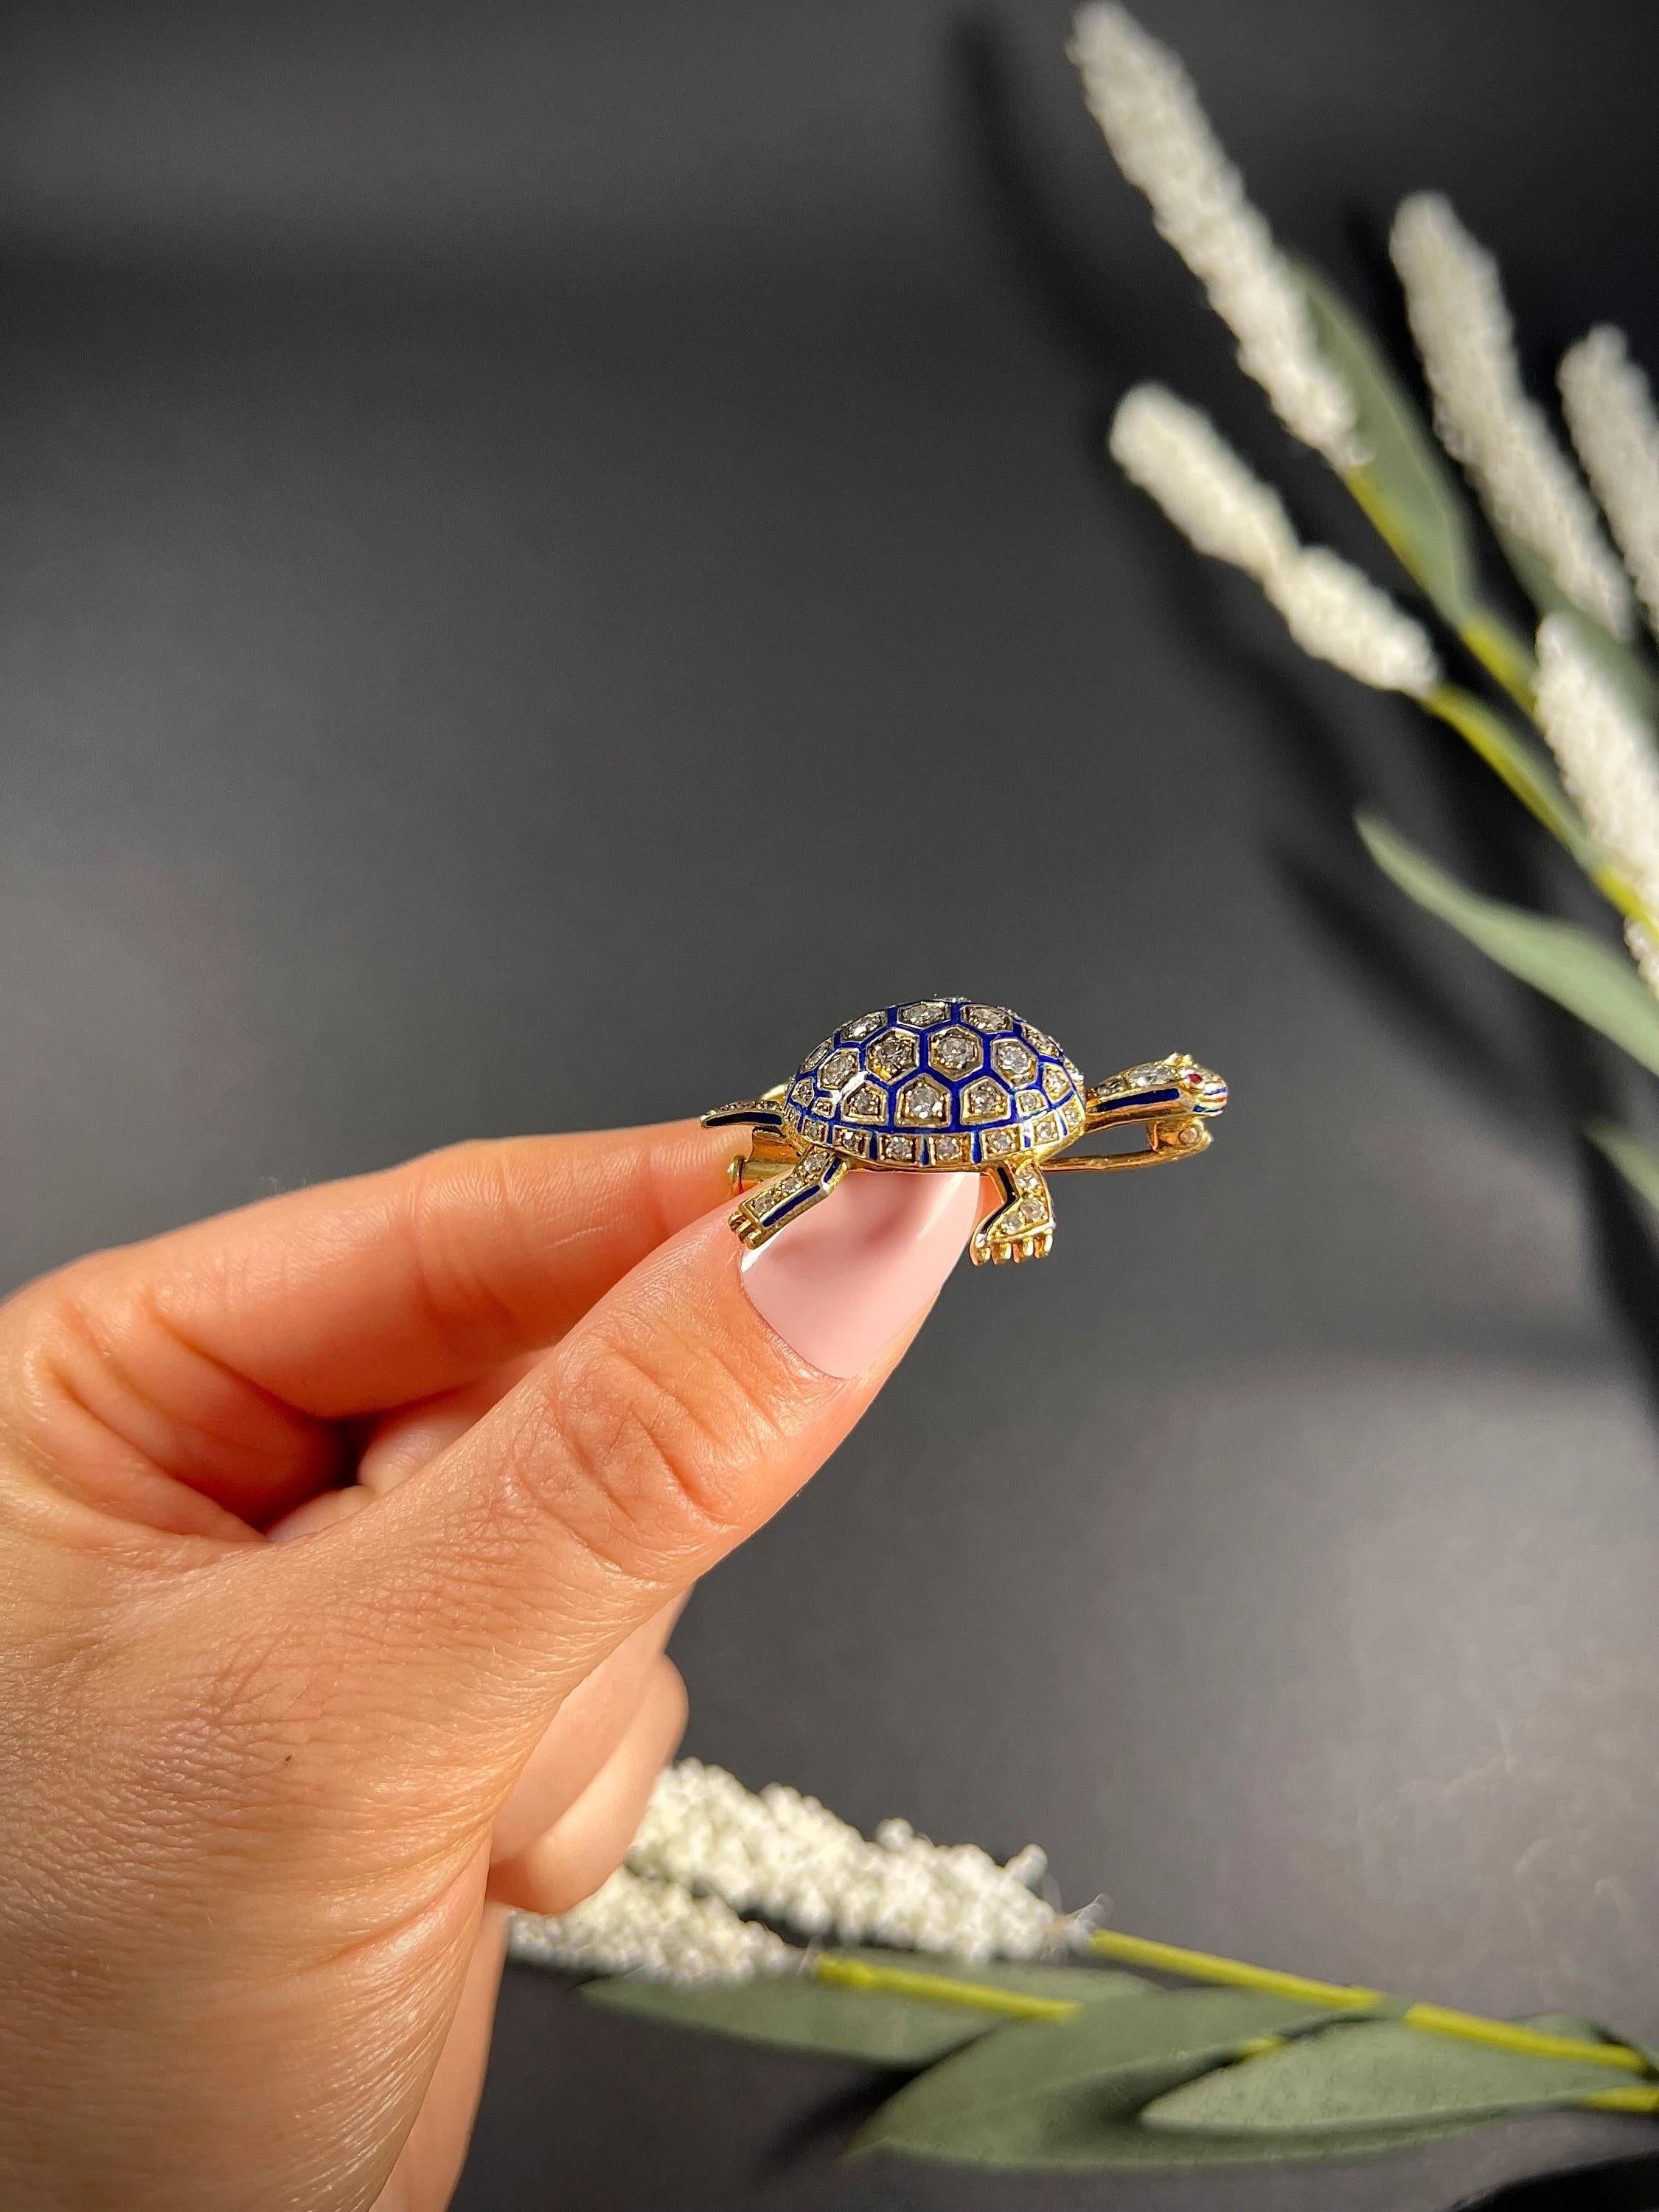 Antique Tortoise Brooch

18ct Gold Tested 

Circa 1920’s

Fabulous, antique tortoise brooch. Set with beautiful, blue enamel & gorgeous old cut diamonds. The detailing is so pretty, from his patterned shell to his cute little diamond feet & head- he